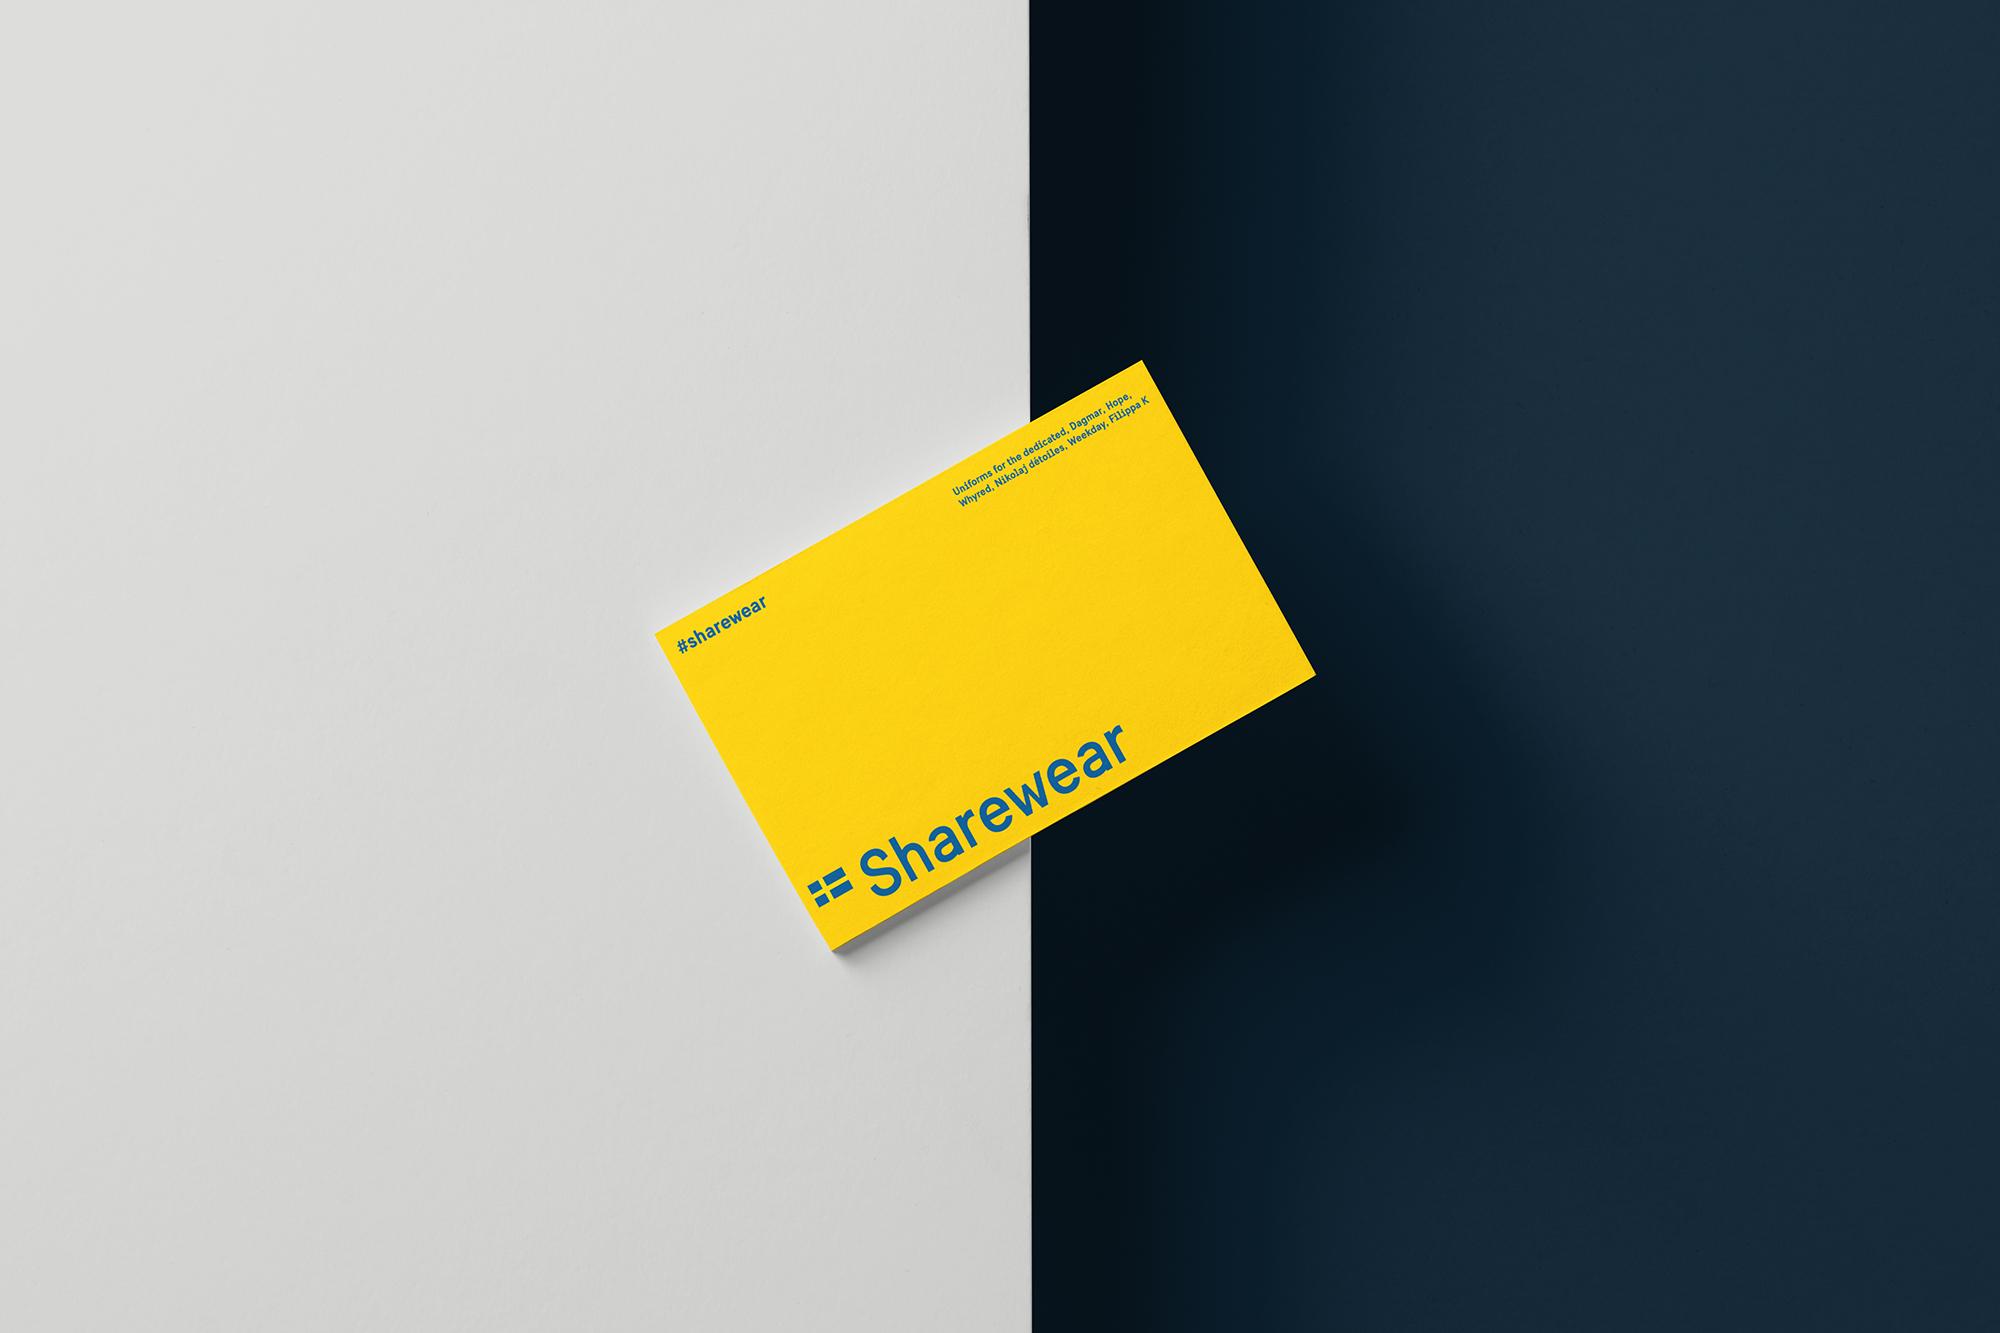 A prototype business card in the Sweden brand design.